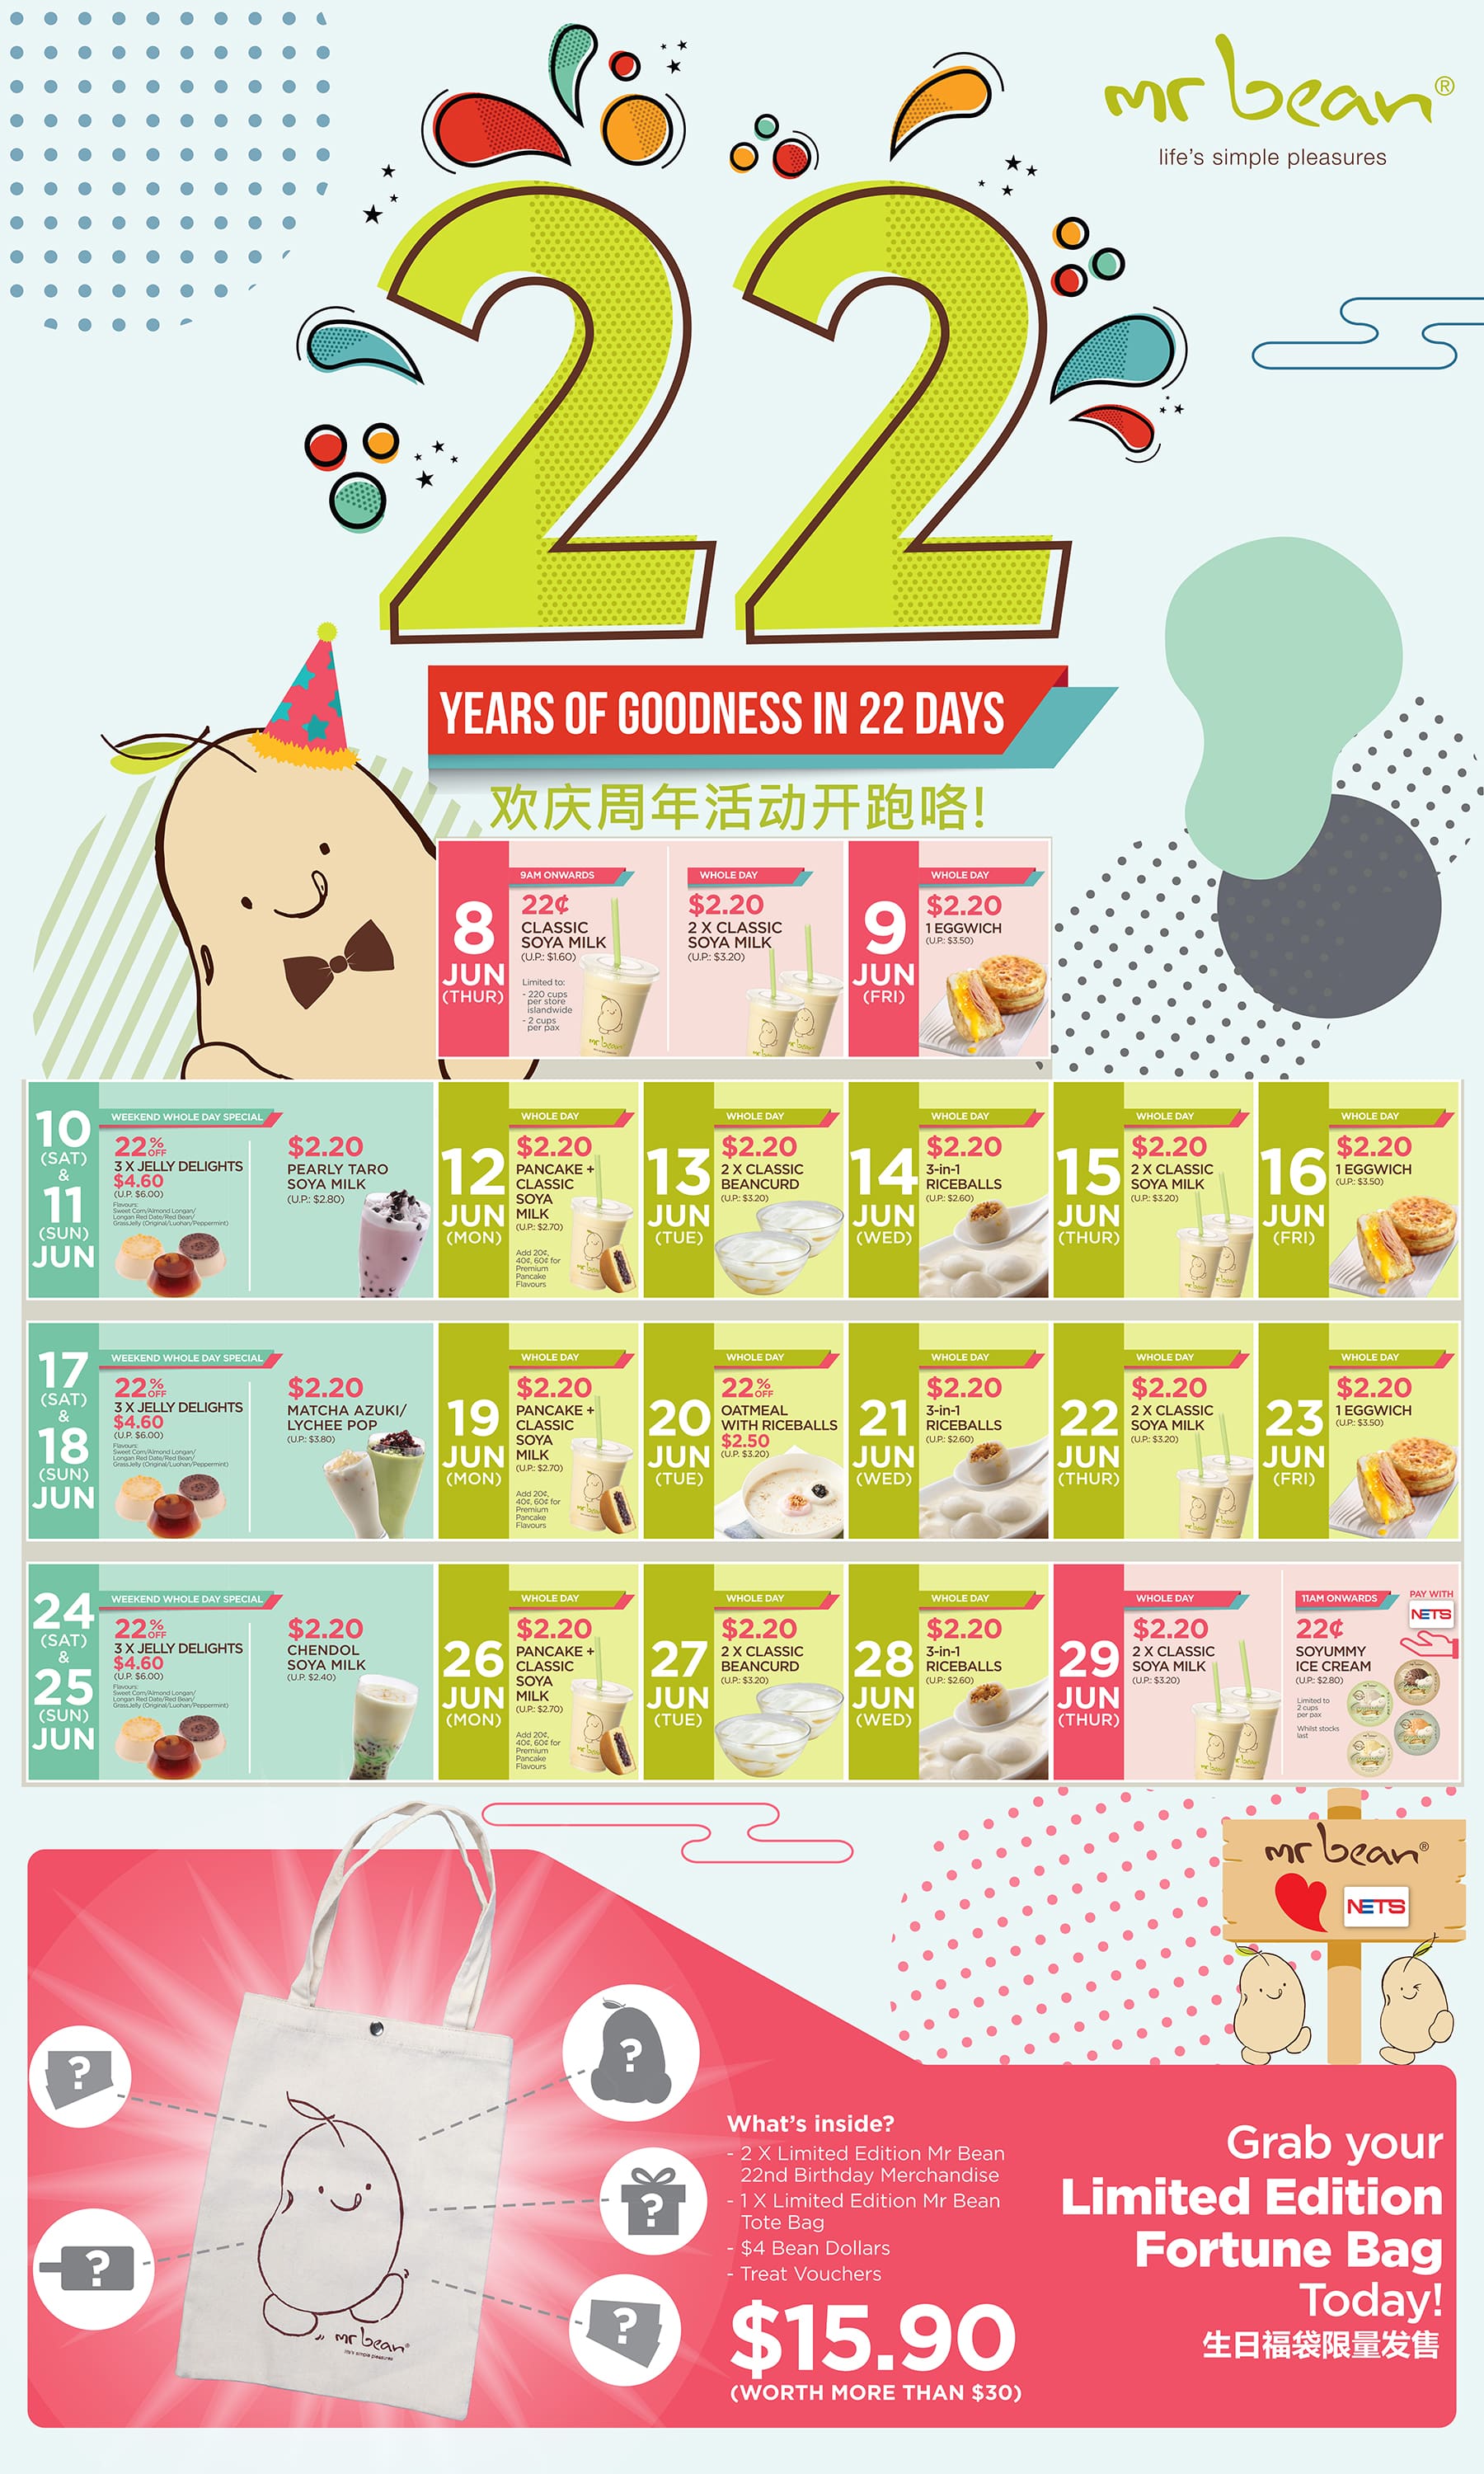 Mr Bean celebrates 22nd anniversary with 22 days of treats! Valid till